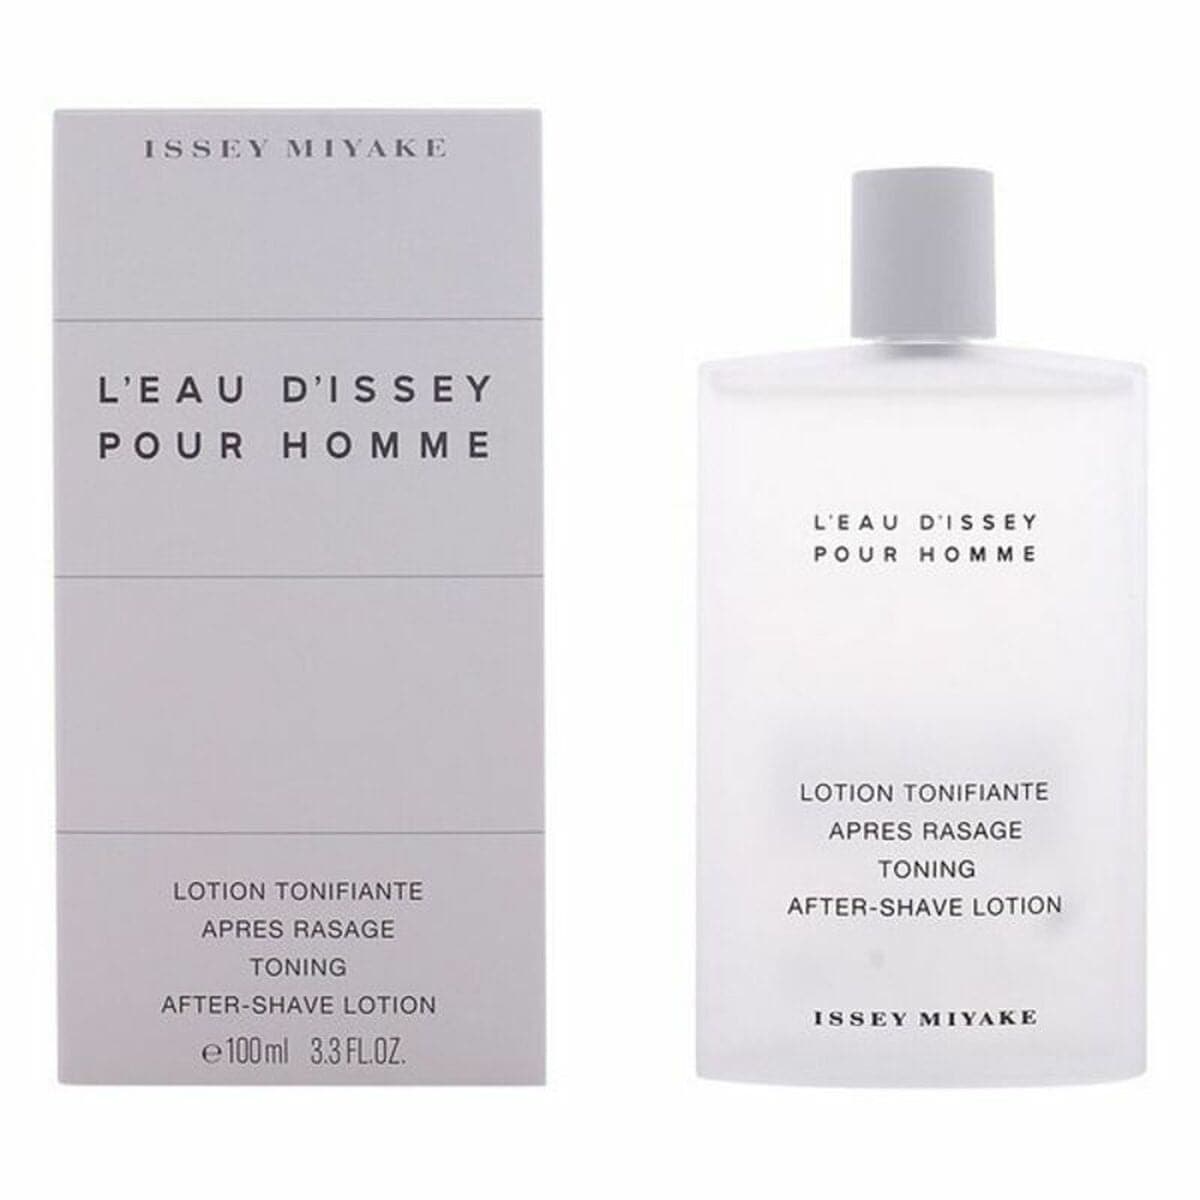 After Shave Lotion Issey Miyake (100 ml) L'eau D'issey Pour Homme (100 ml)-0